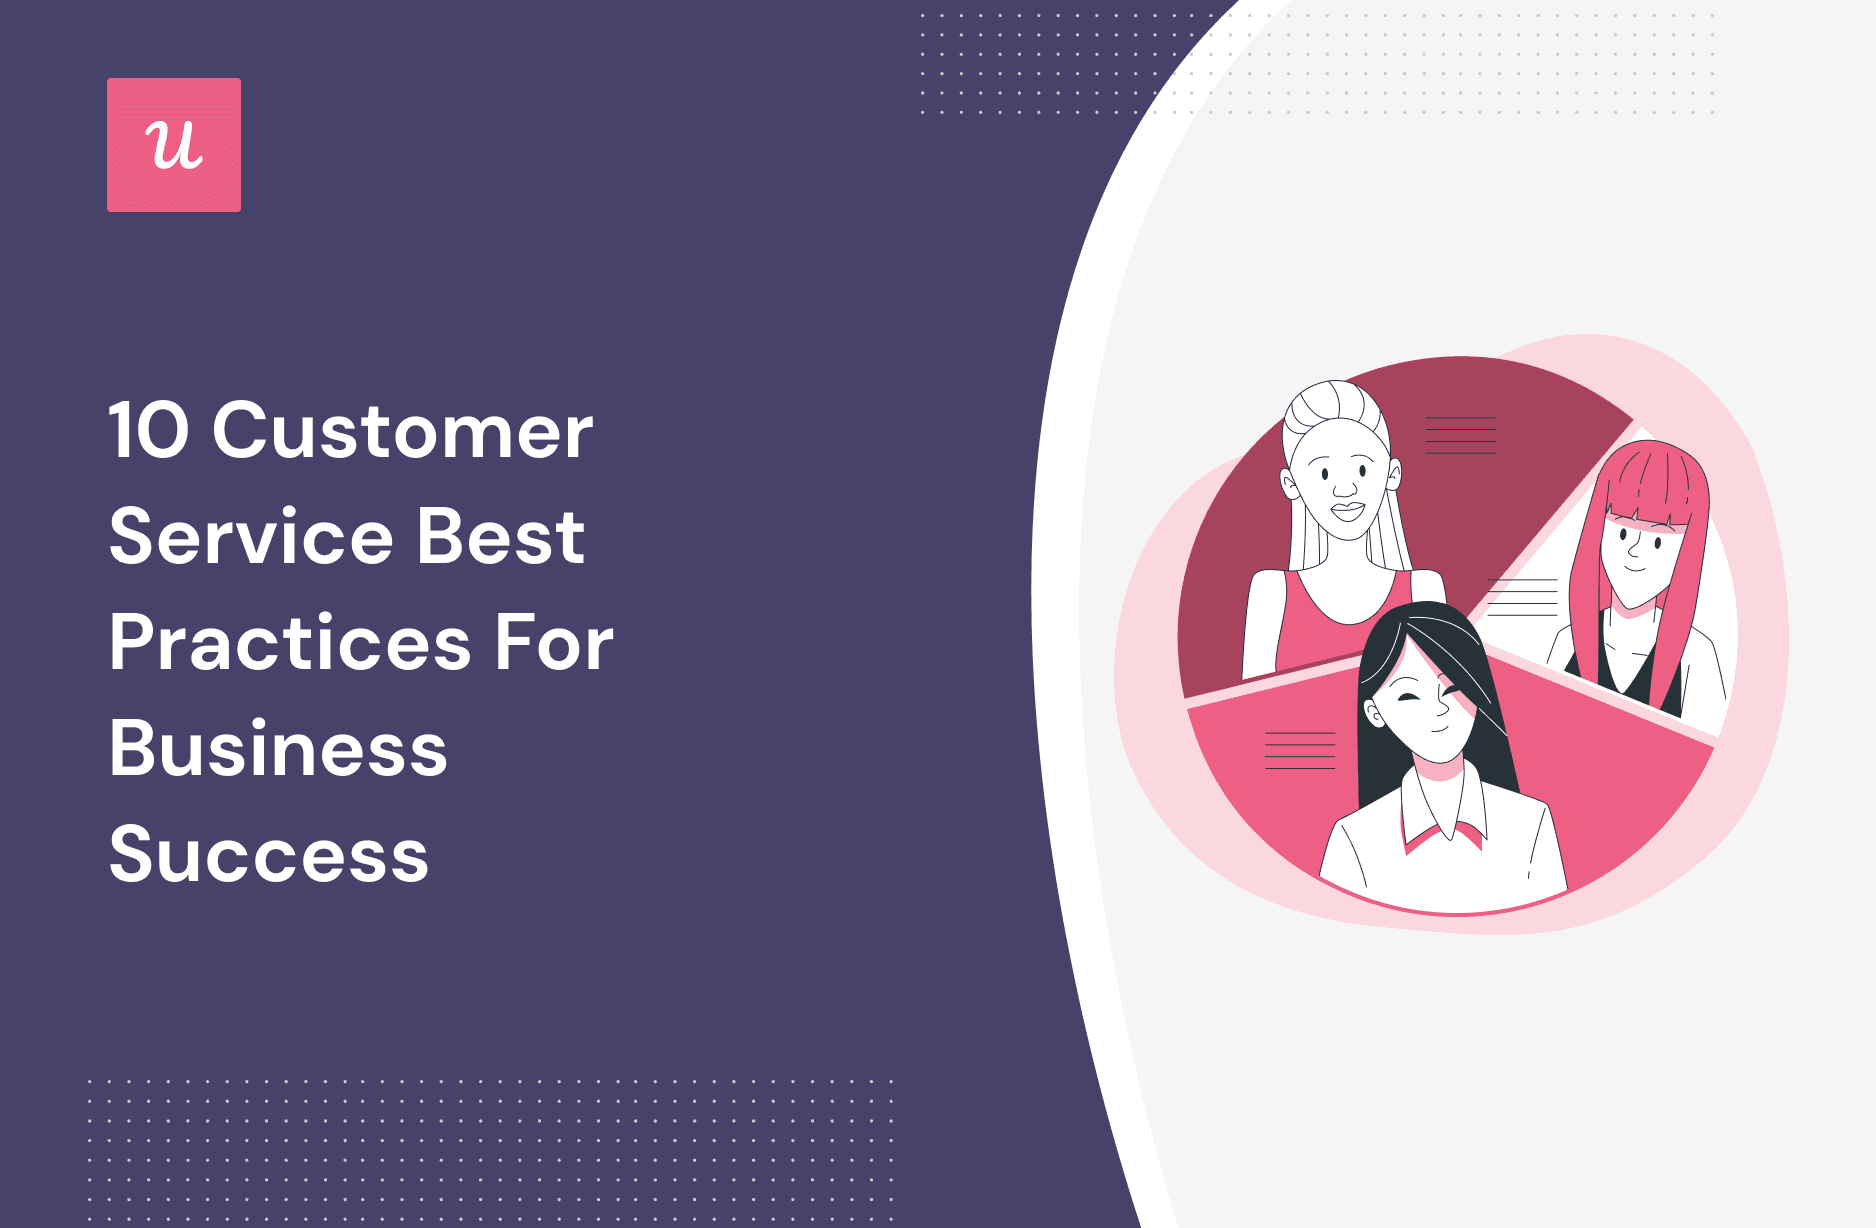 10 Customer Service Best Practices For Business Success cover